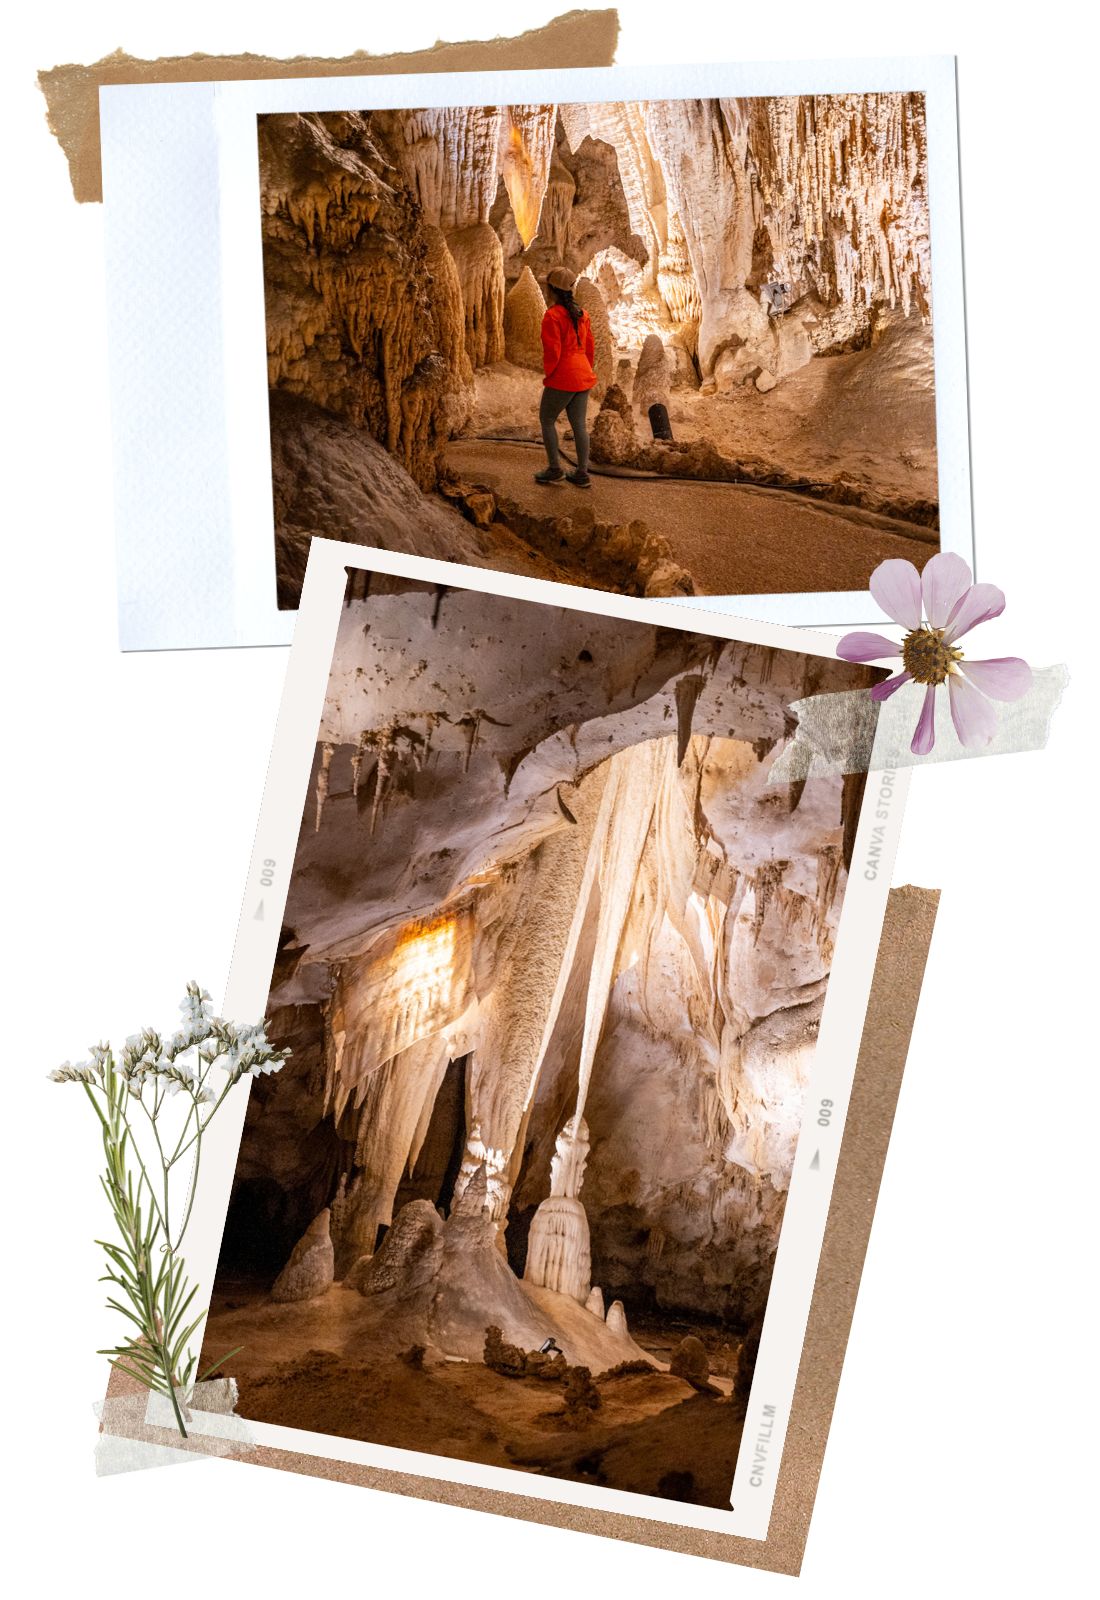 Carlsbad Caverns King's Palace Tour - The Adventure 3